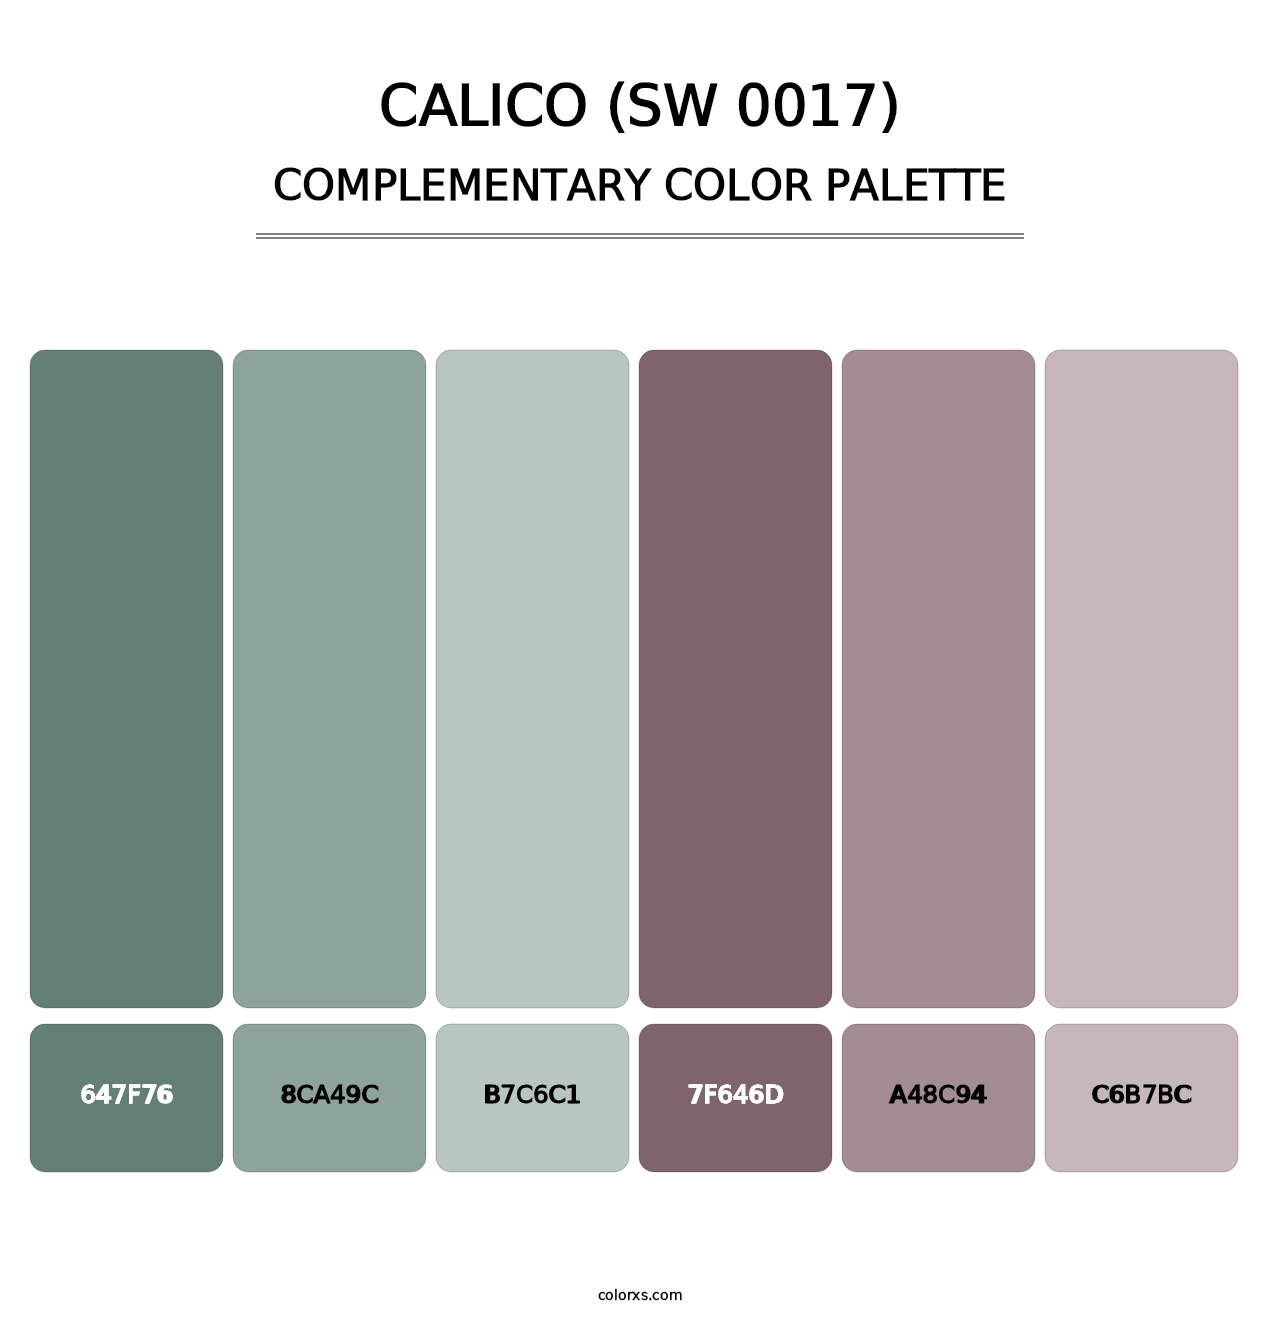 Calico (SW 0017) - Complementary Color Palette